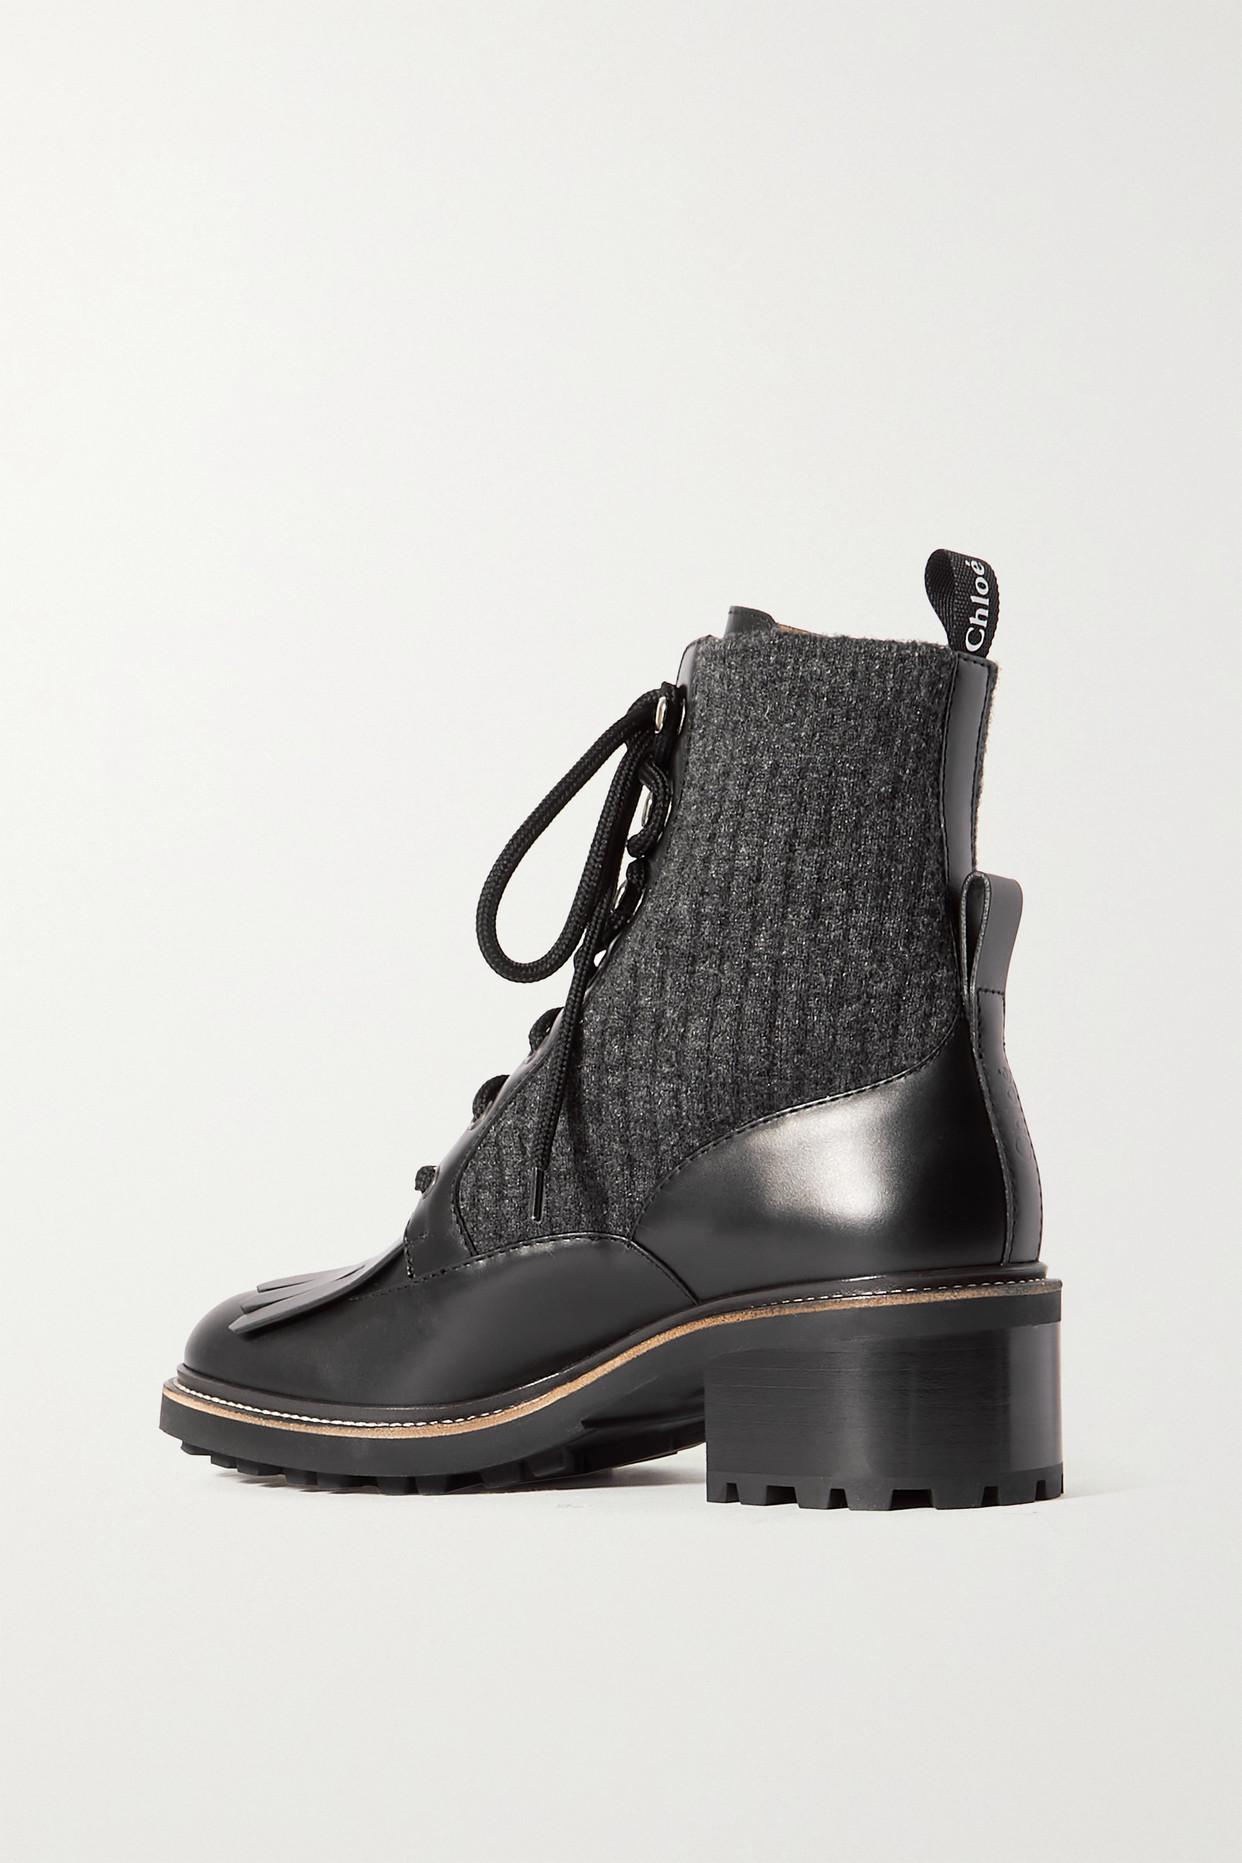 Chloé Denim Franne Tasseled Leather And Ribbed Wool Ankle Boots in Black |  Lyst